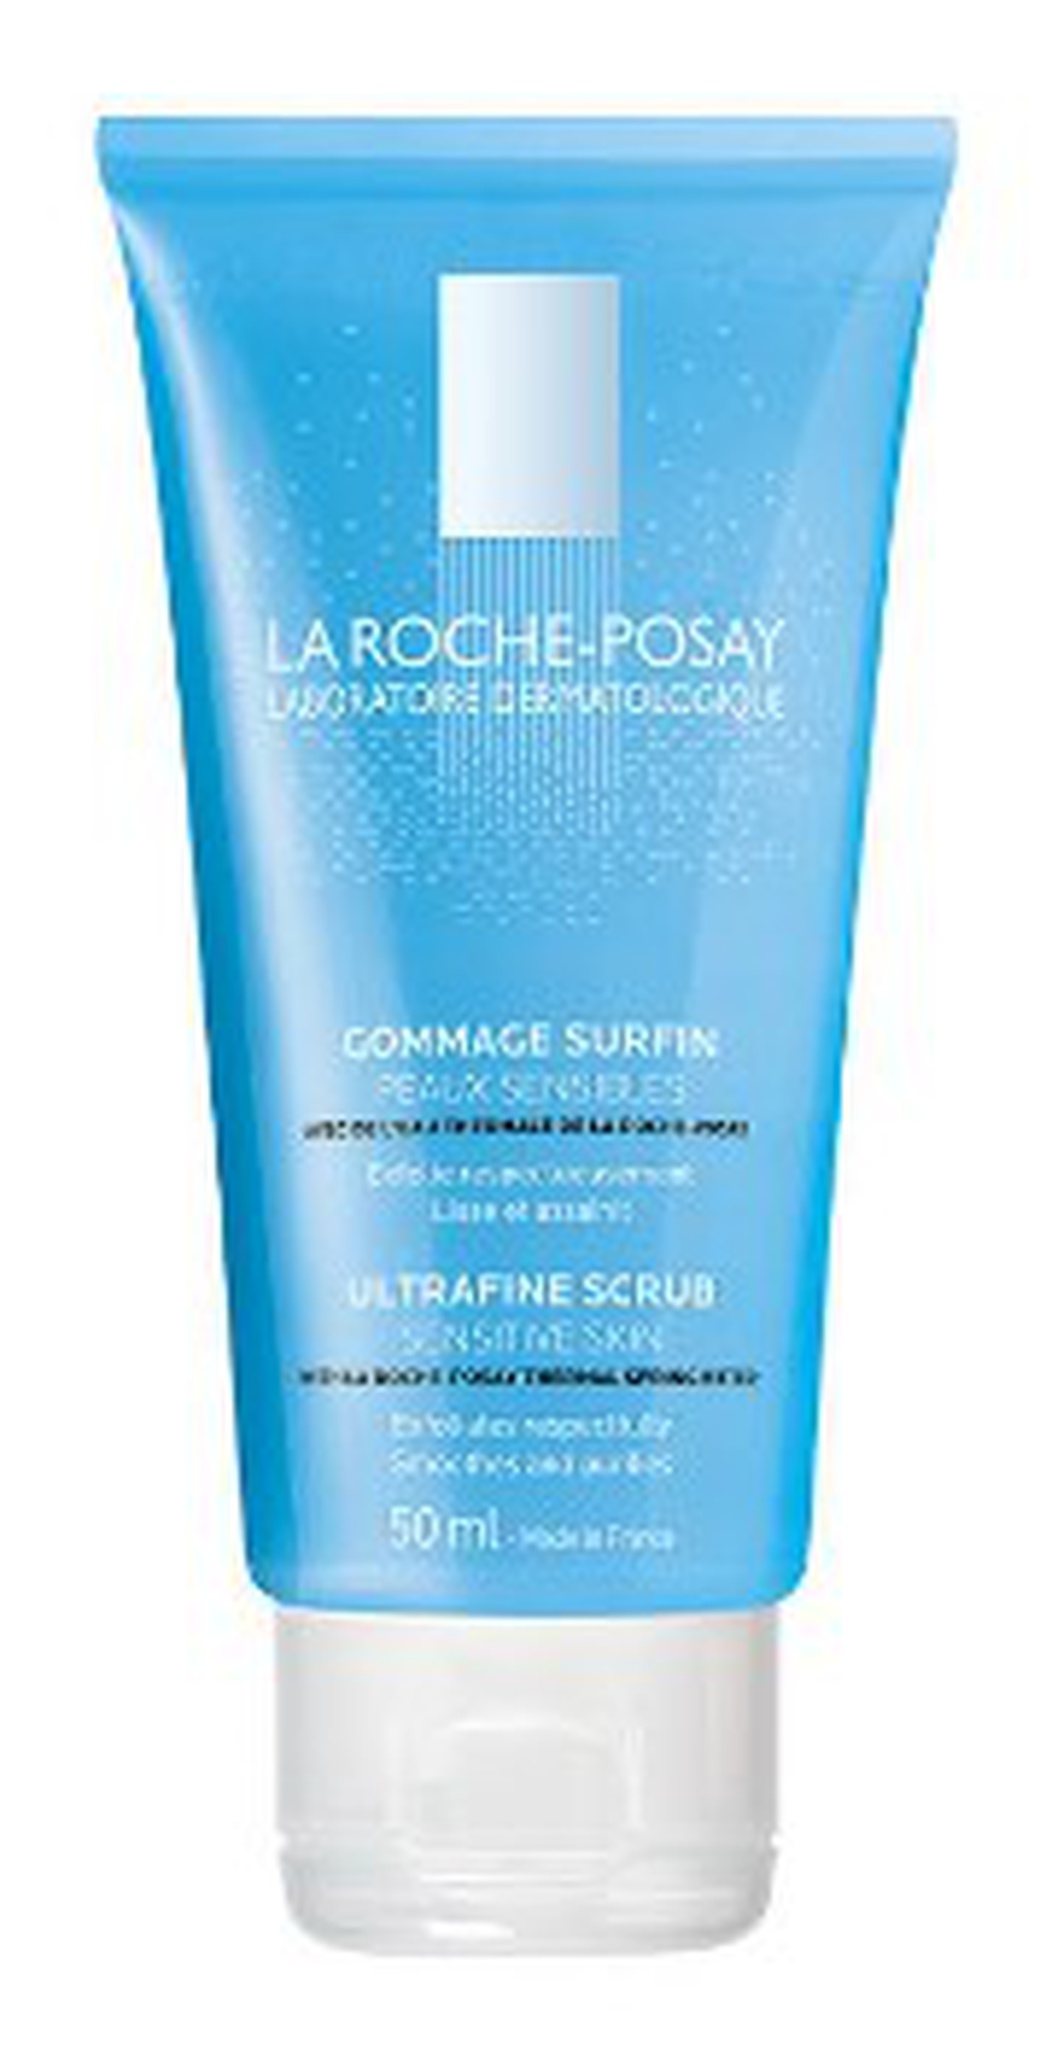 La Roche-Posay Physiological скраб 50мл фото